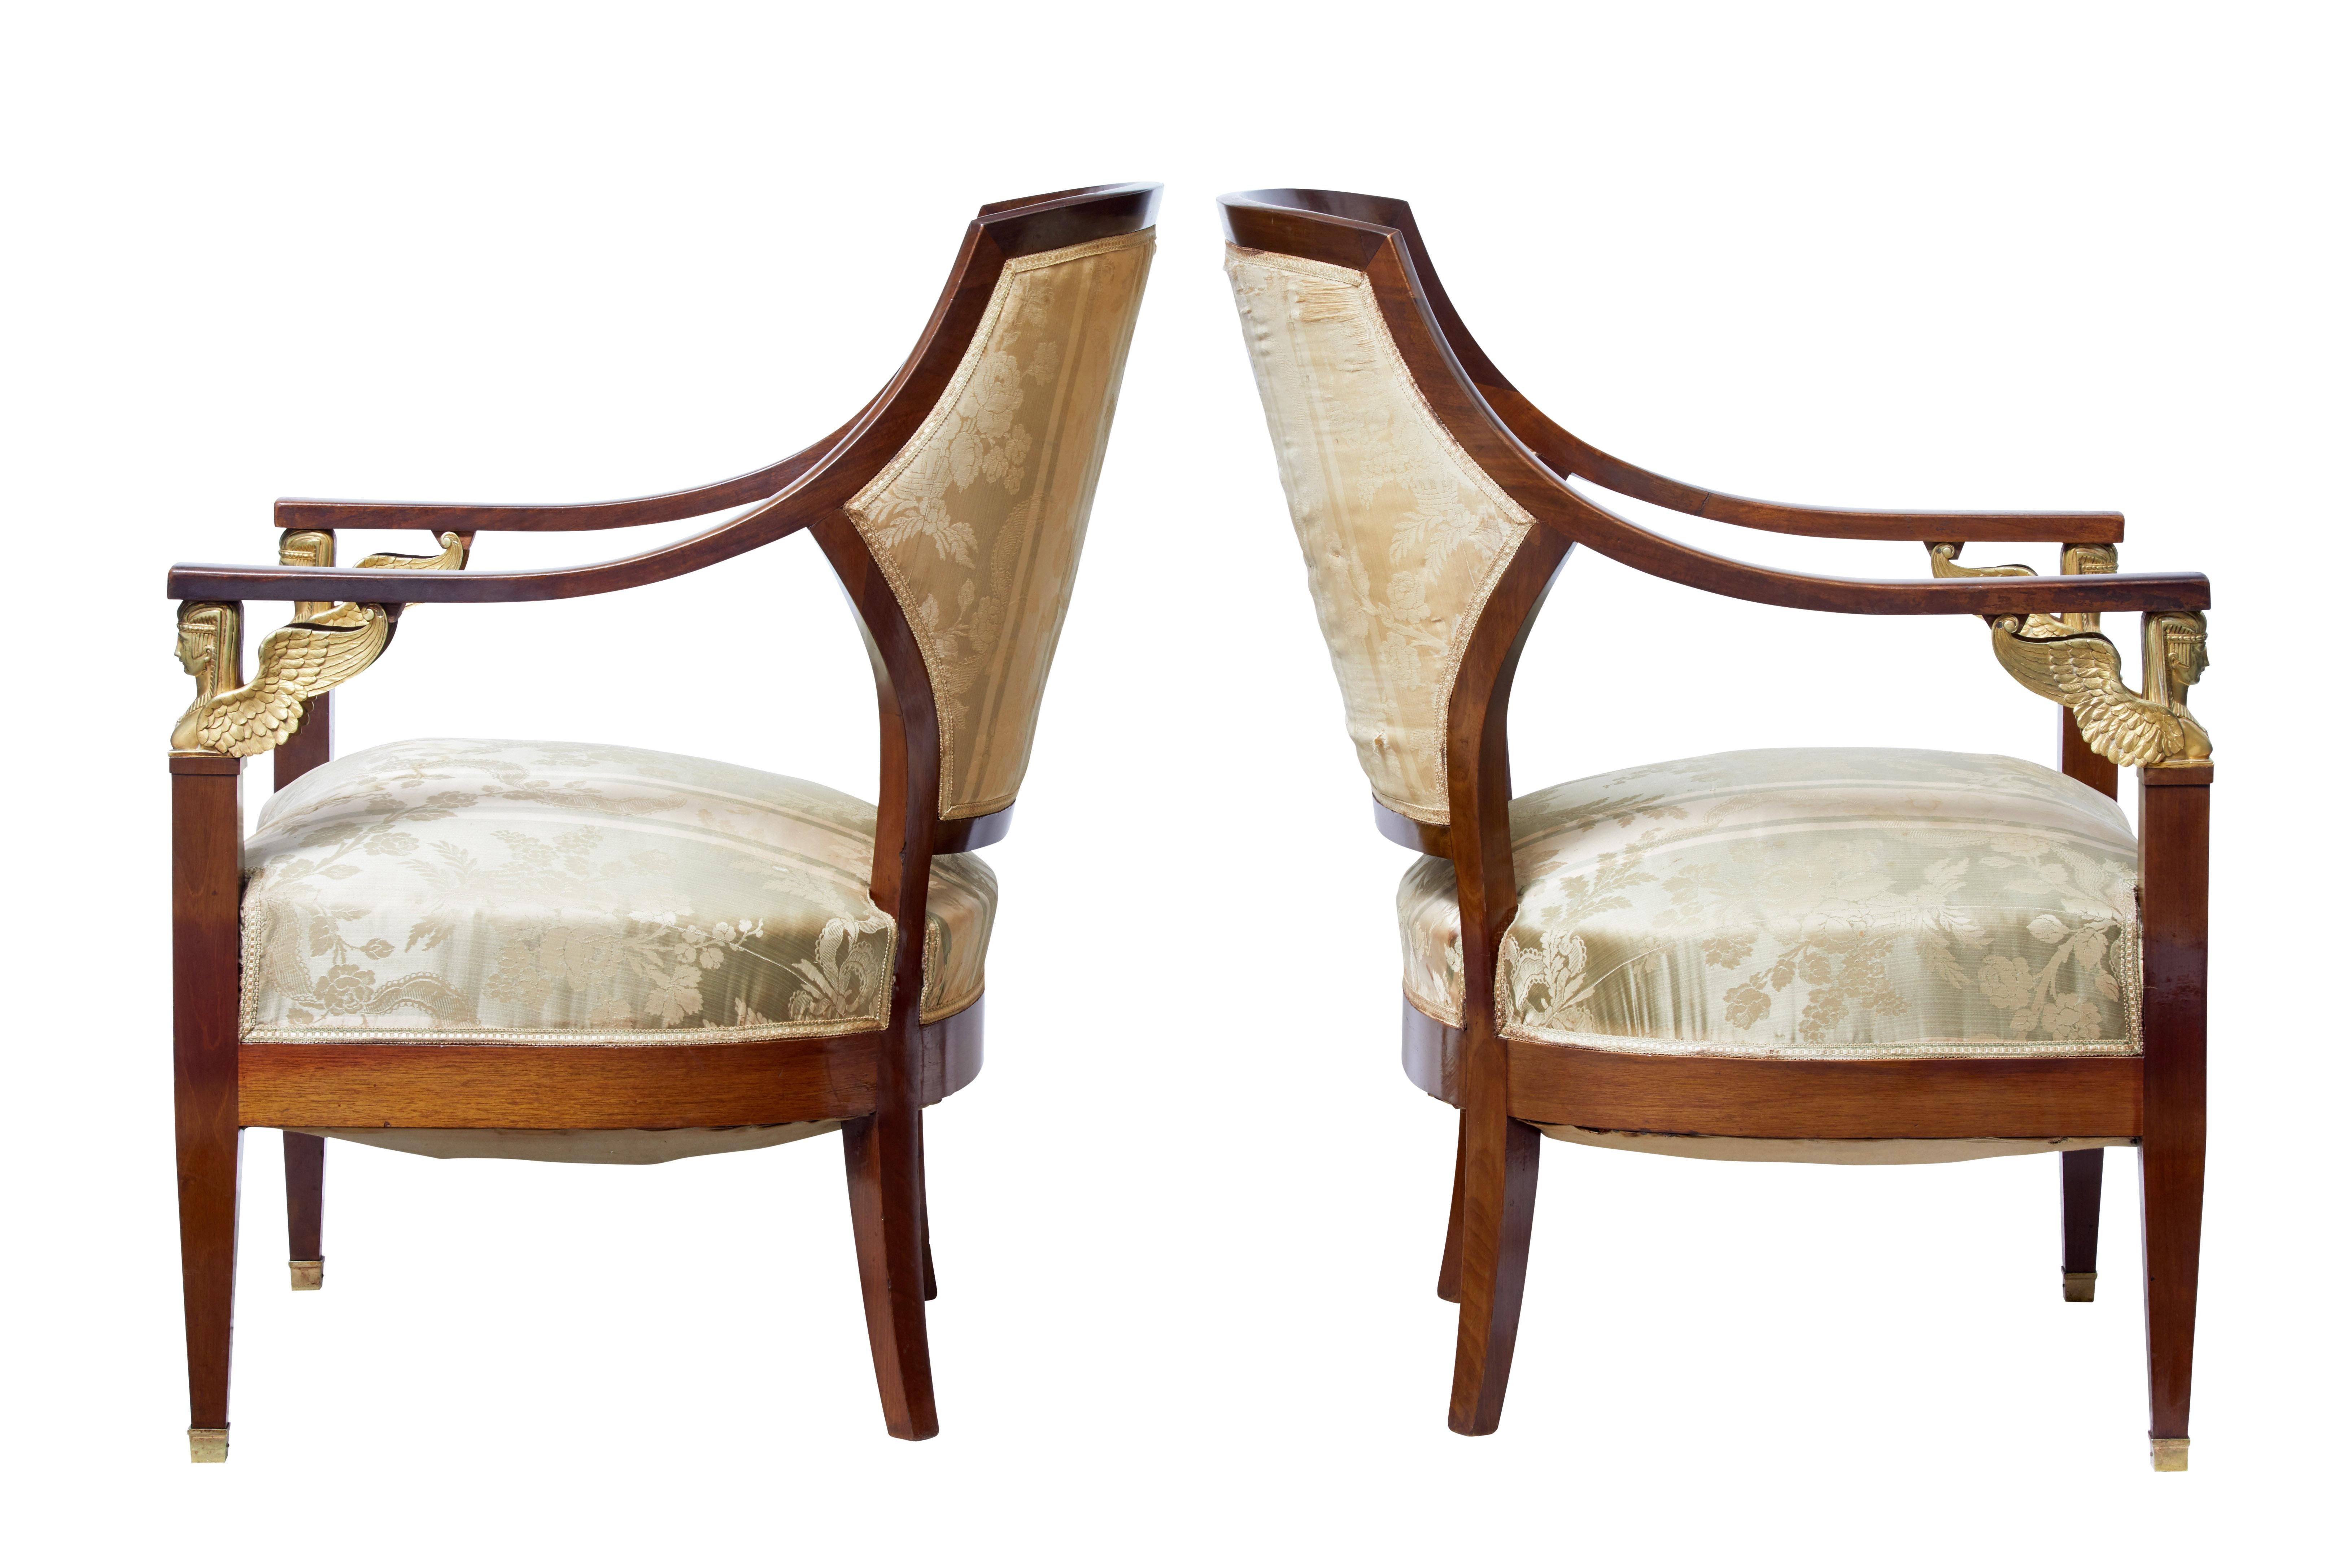 Fine quality pair of French mahogany armchairs in the Empire taste, circa 1890.

Shaped back and arms to this elegant pair of chairs with Egyptian ormolu mounts below the arm.

Standing on tapered legs with brass caps to the front legs.

In